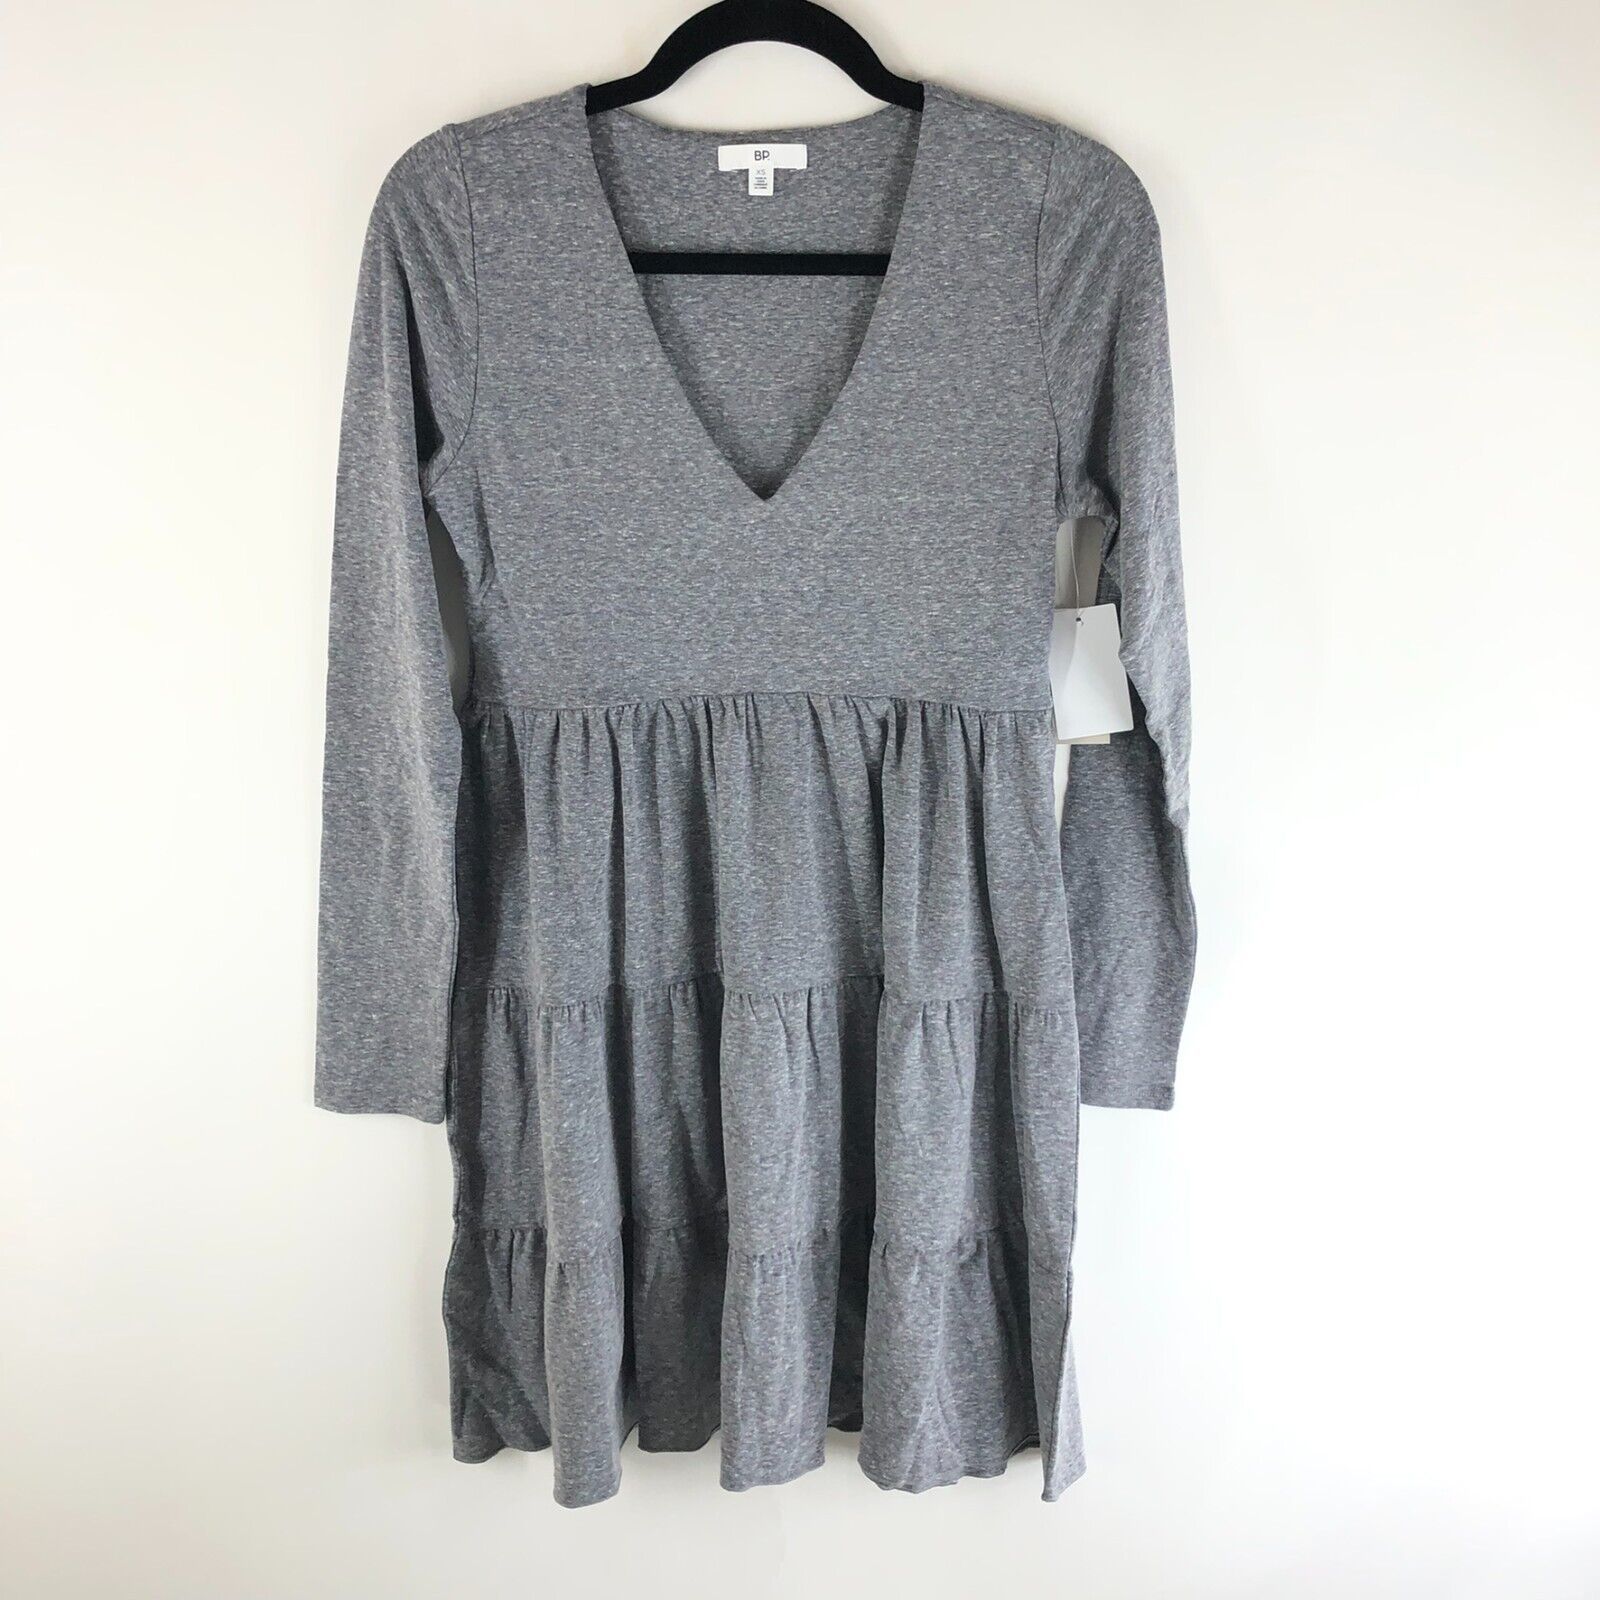 Primary image for BP Mini Dress Tiered Long Sleeve V Neck Knit Heathered Gray XS